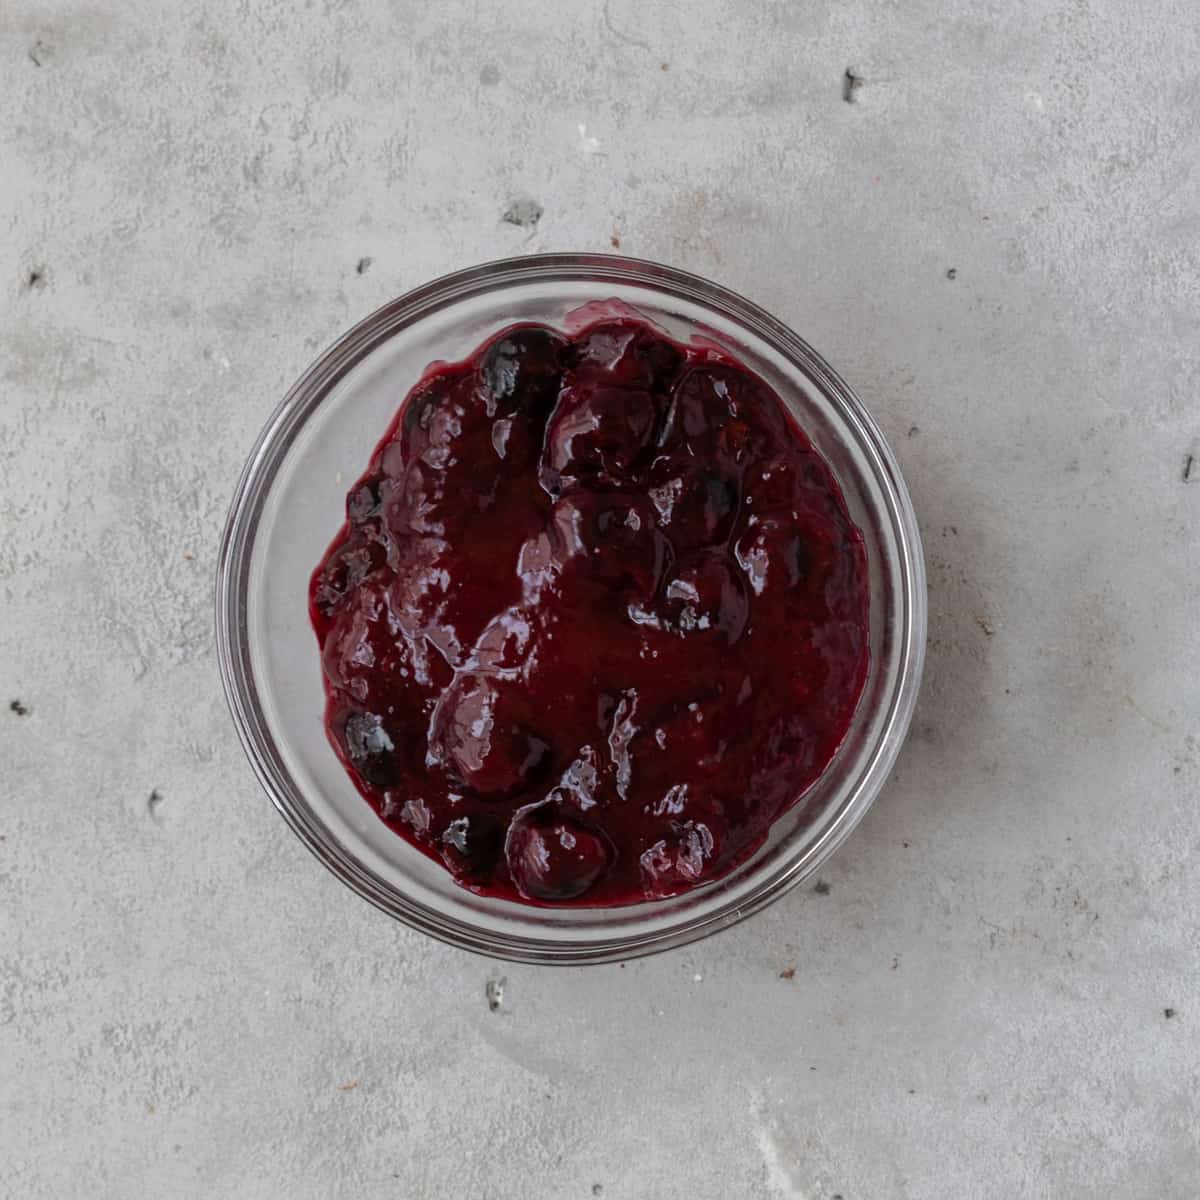 the completed cherry compote in a glass bowl on grey background